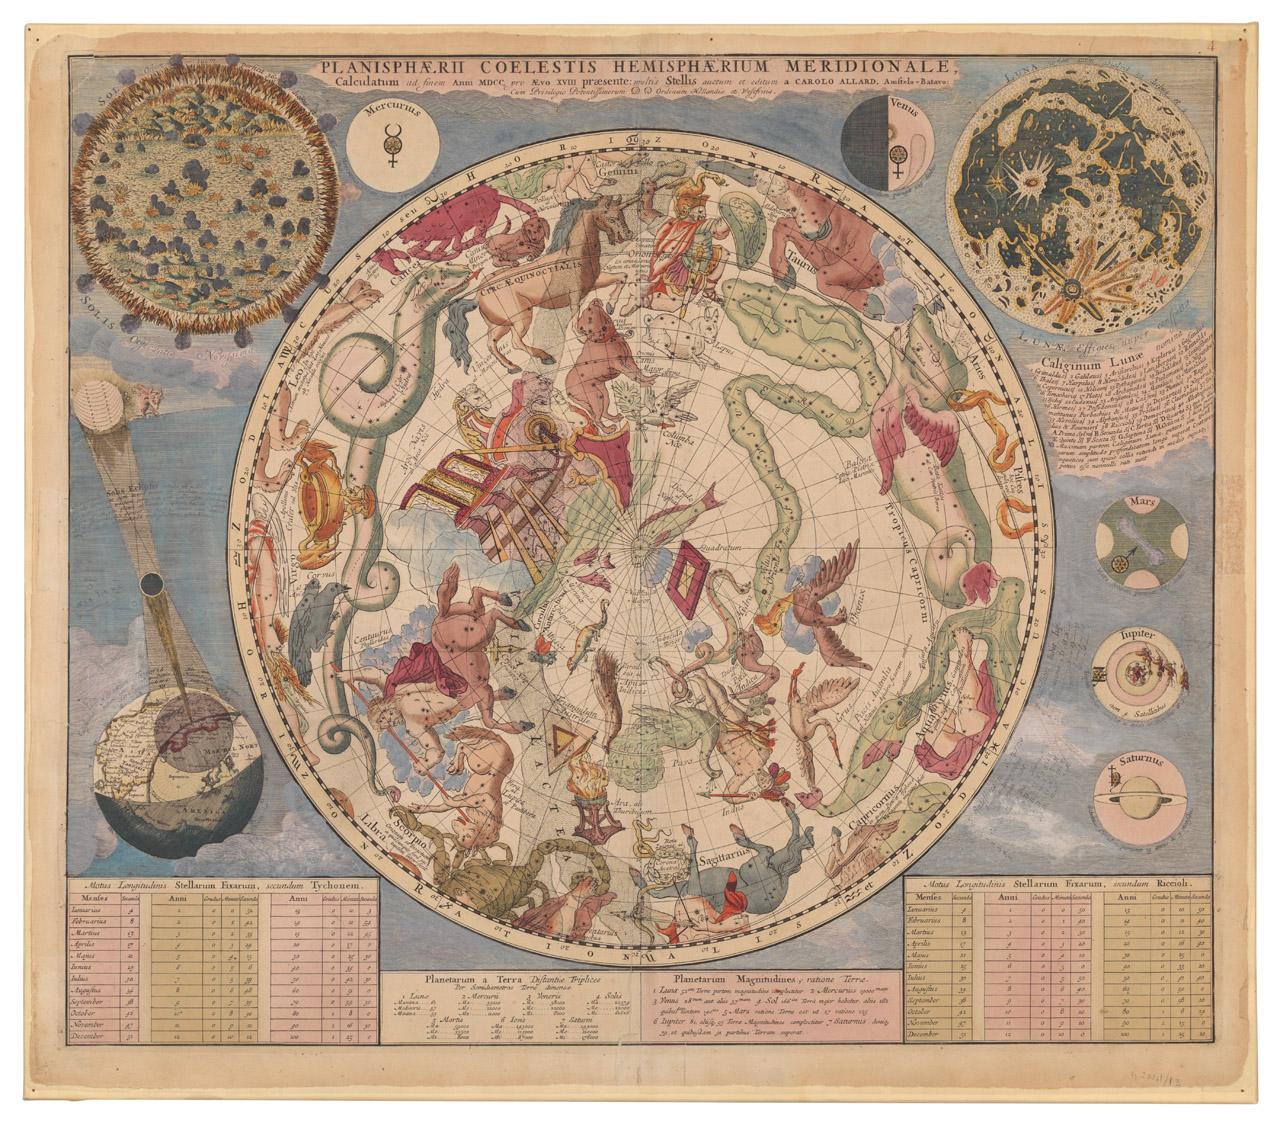 Image of a vivid planisphere, showing the constellations in a large circle with illustrations of snakes, people, fish etc to represent the constellations